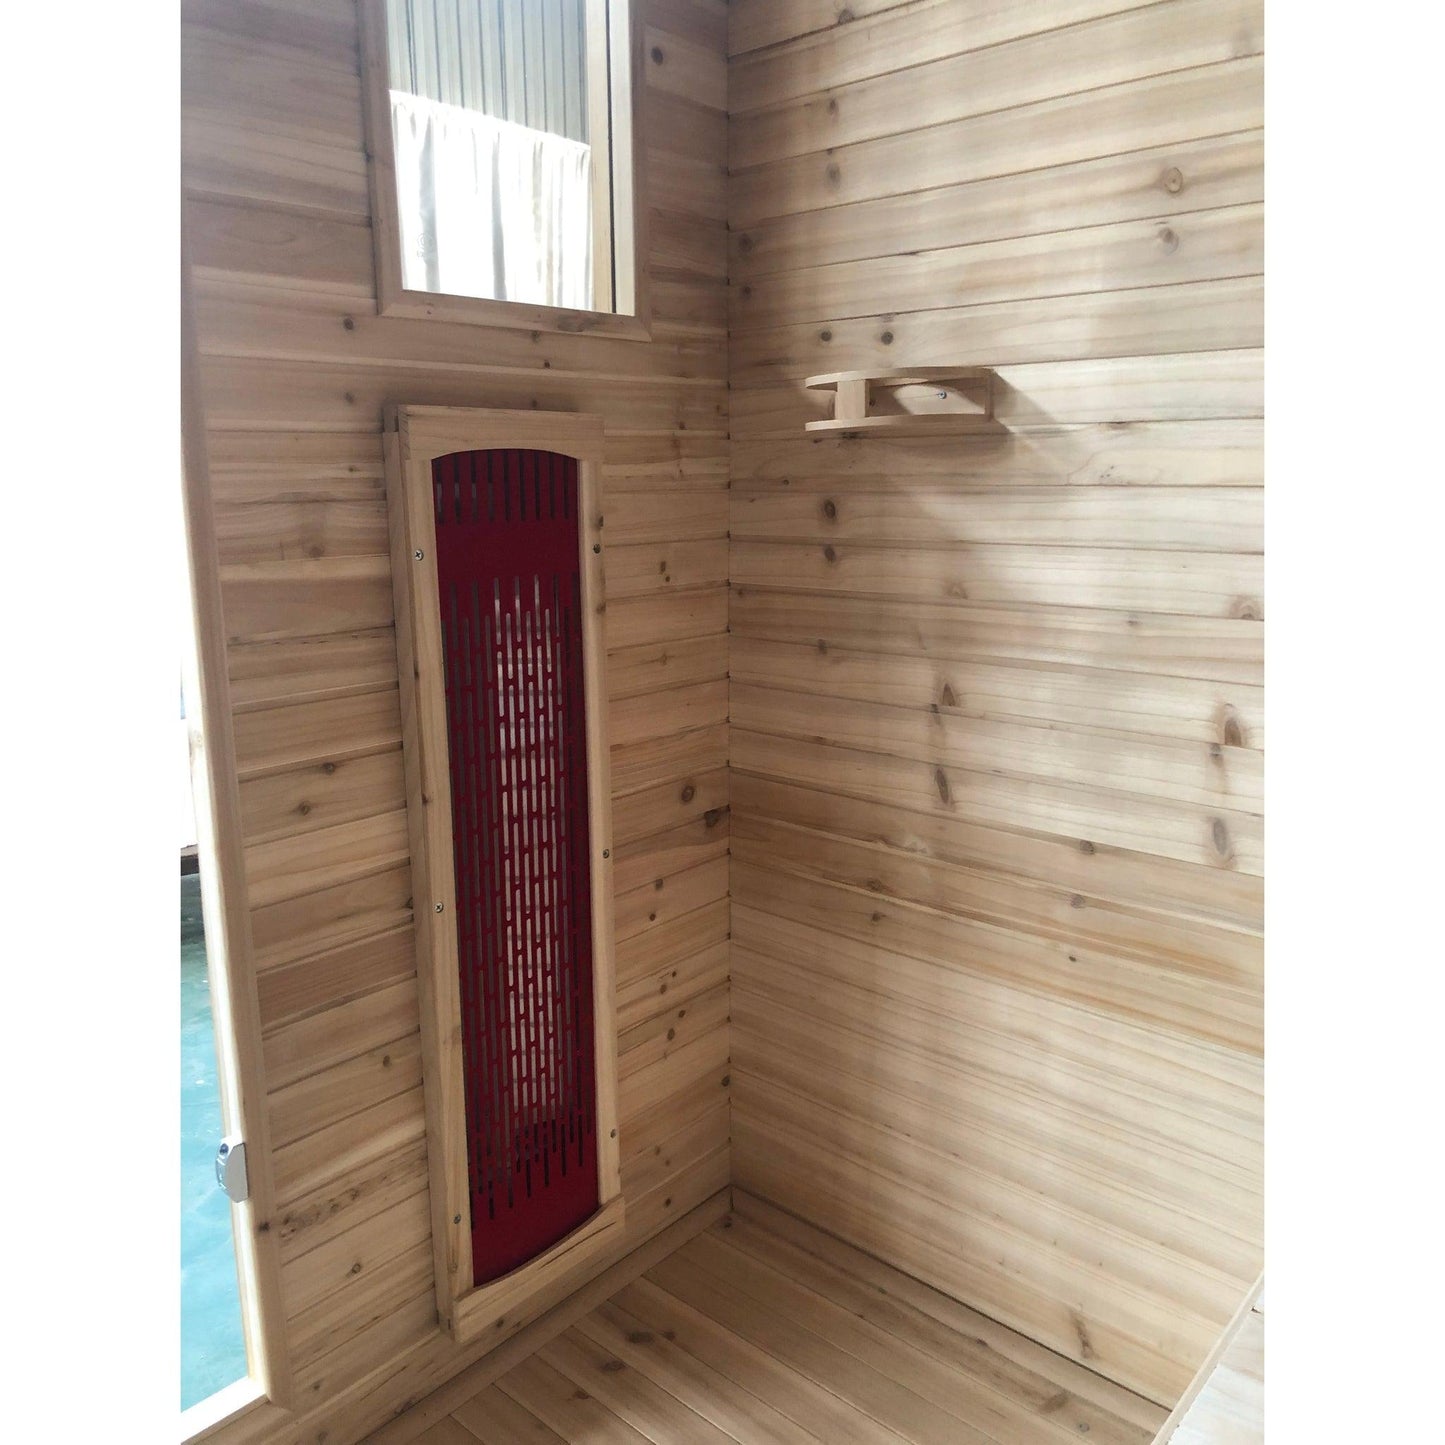 SunRay Cayenne 4-Person Outdoor Infrared Sauna In Hemlock Wood With Ceramic Heaters